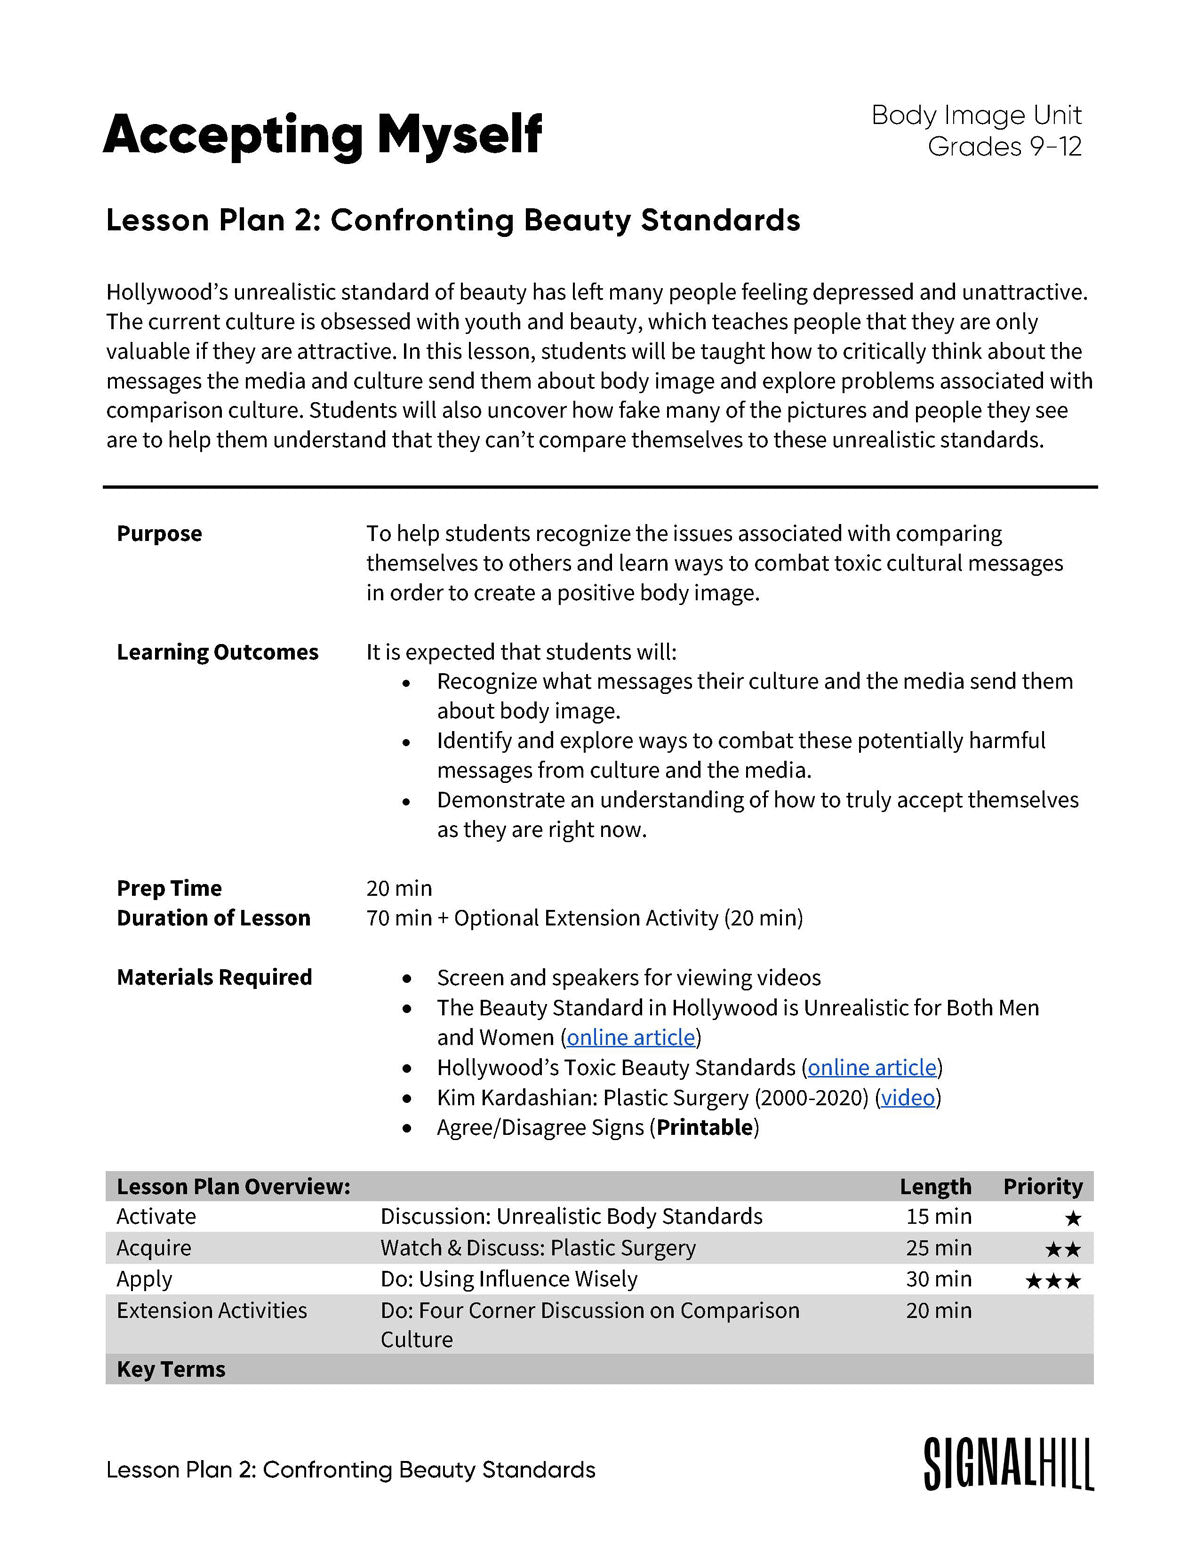 Lesson Plan 2: Confronting Beauty Standards